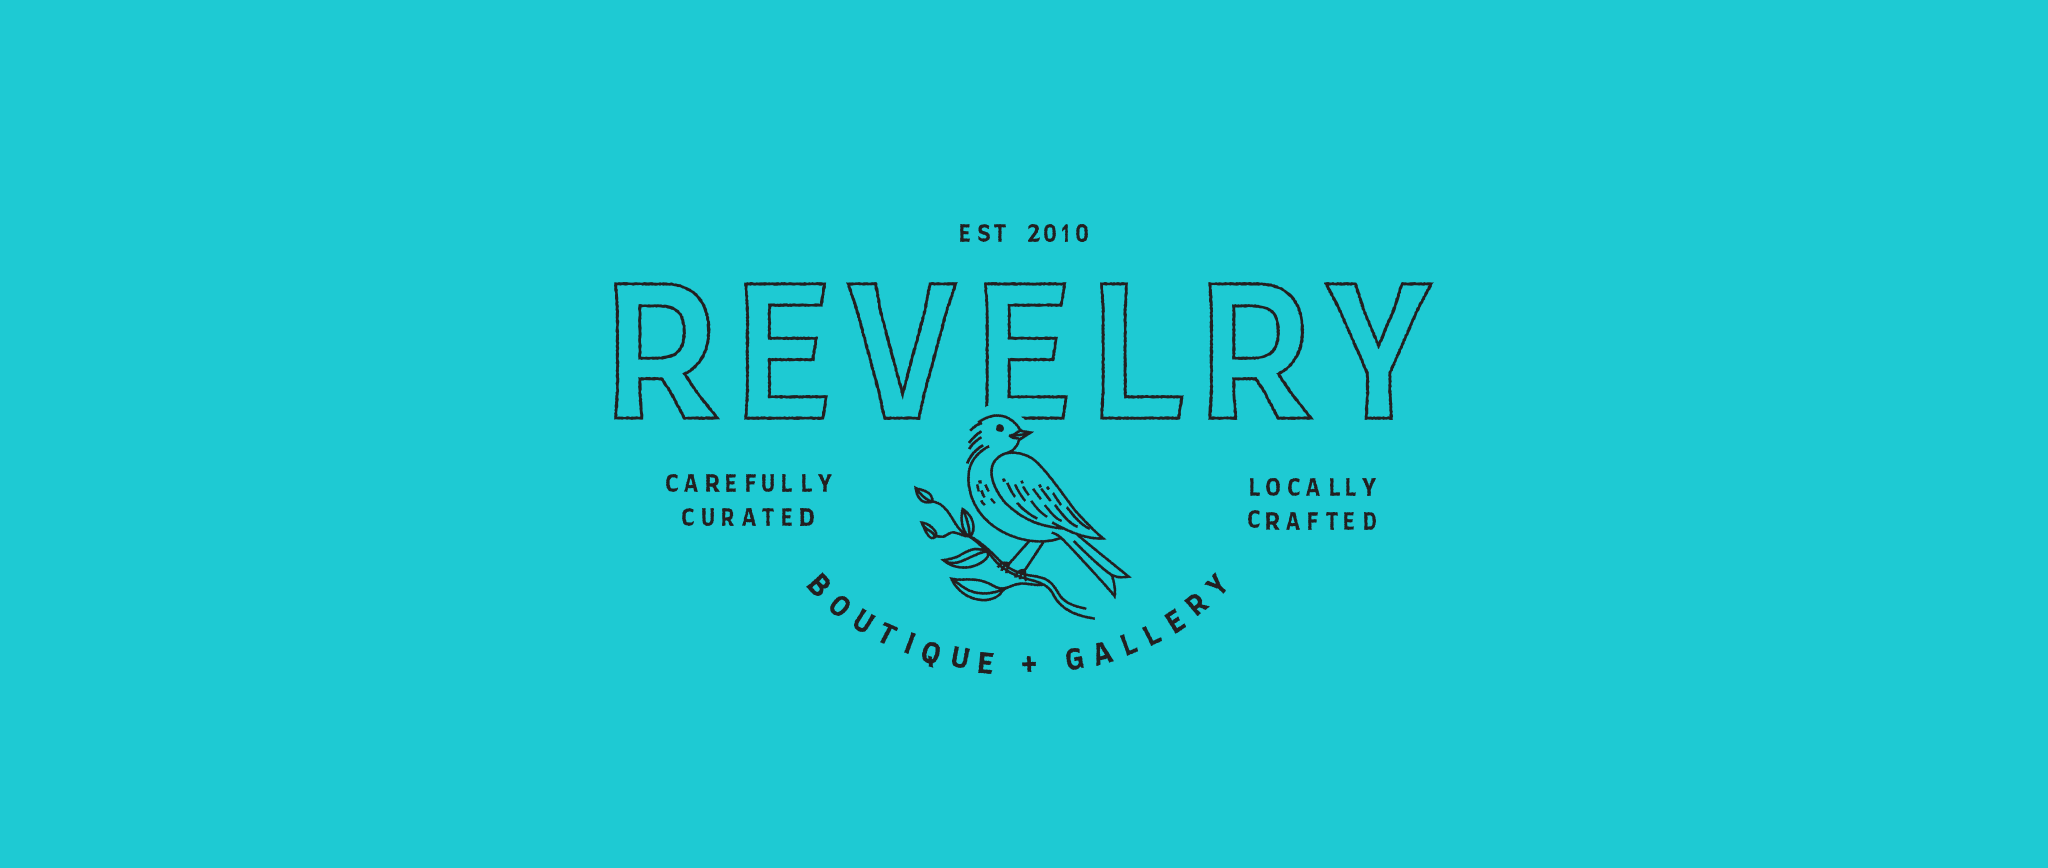 Black Revelry logo on a blue background. "Carefully curated, locally crafted, boutique and gallery."